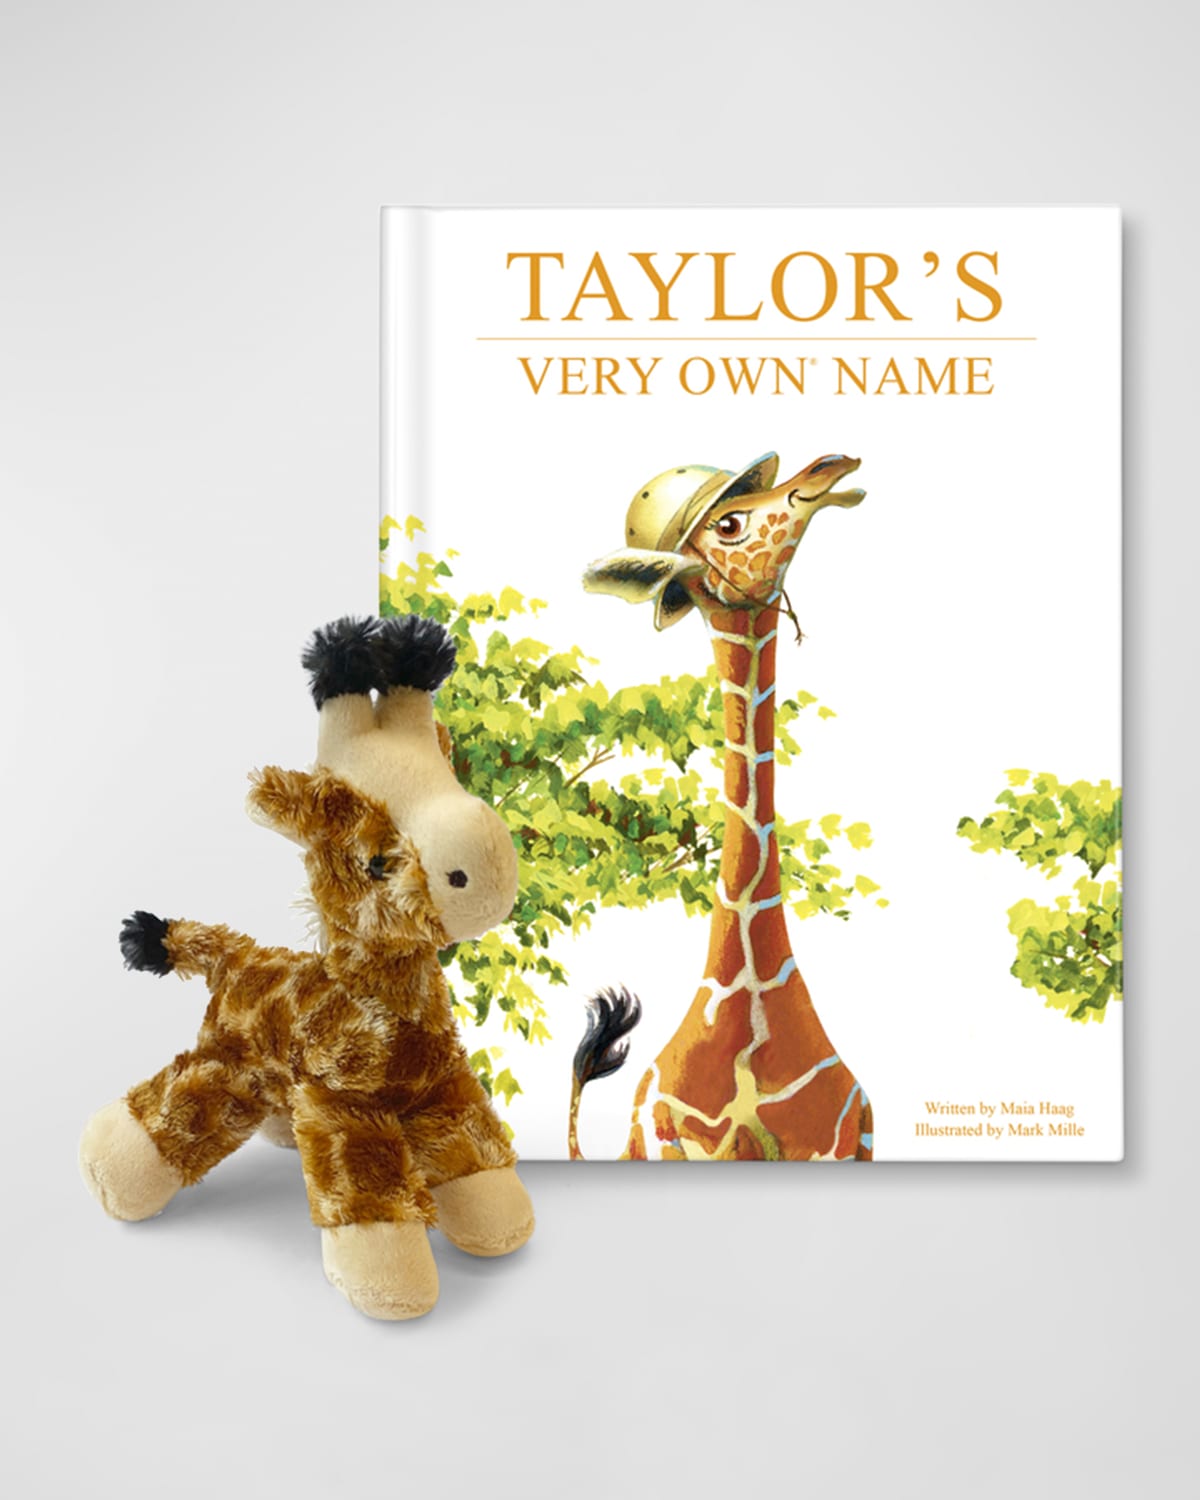 My Very Own Name Personalized Storybook and Plush Giraffe Gift Set